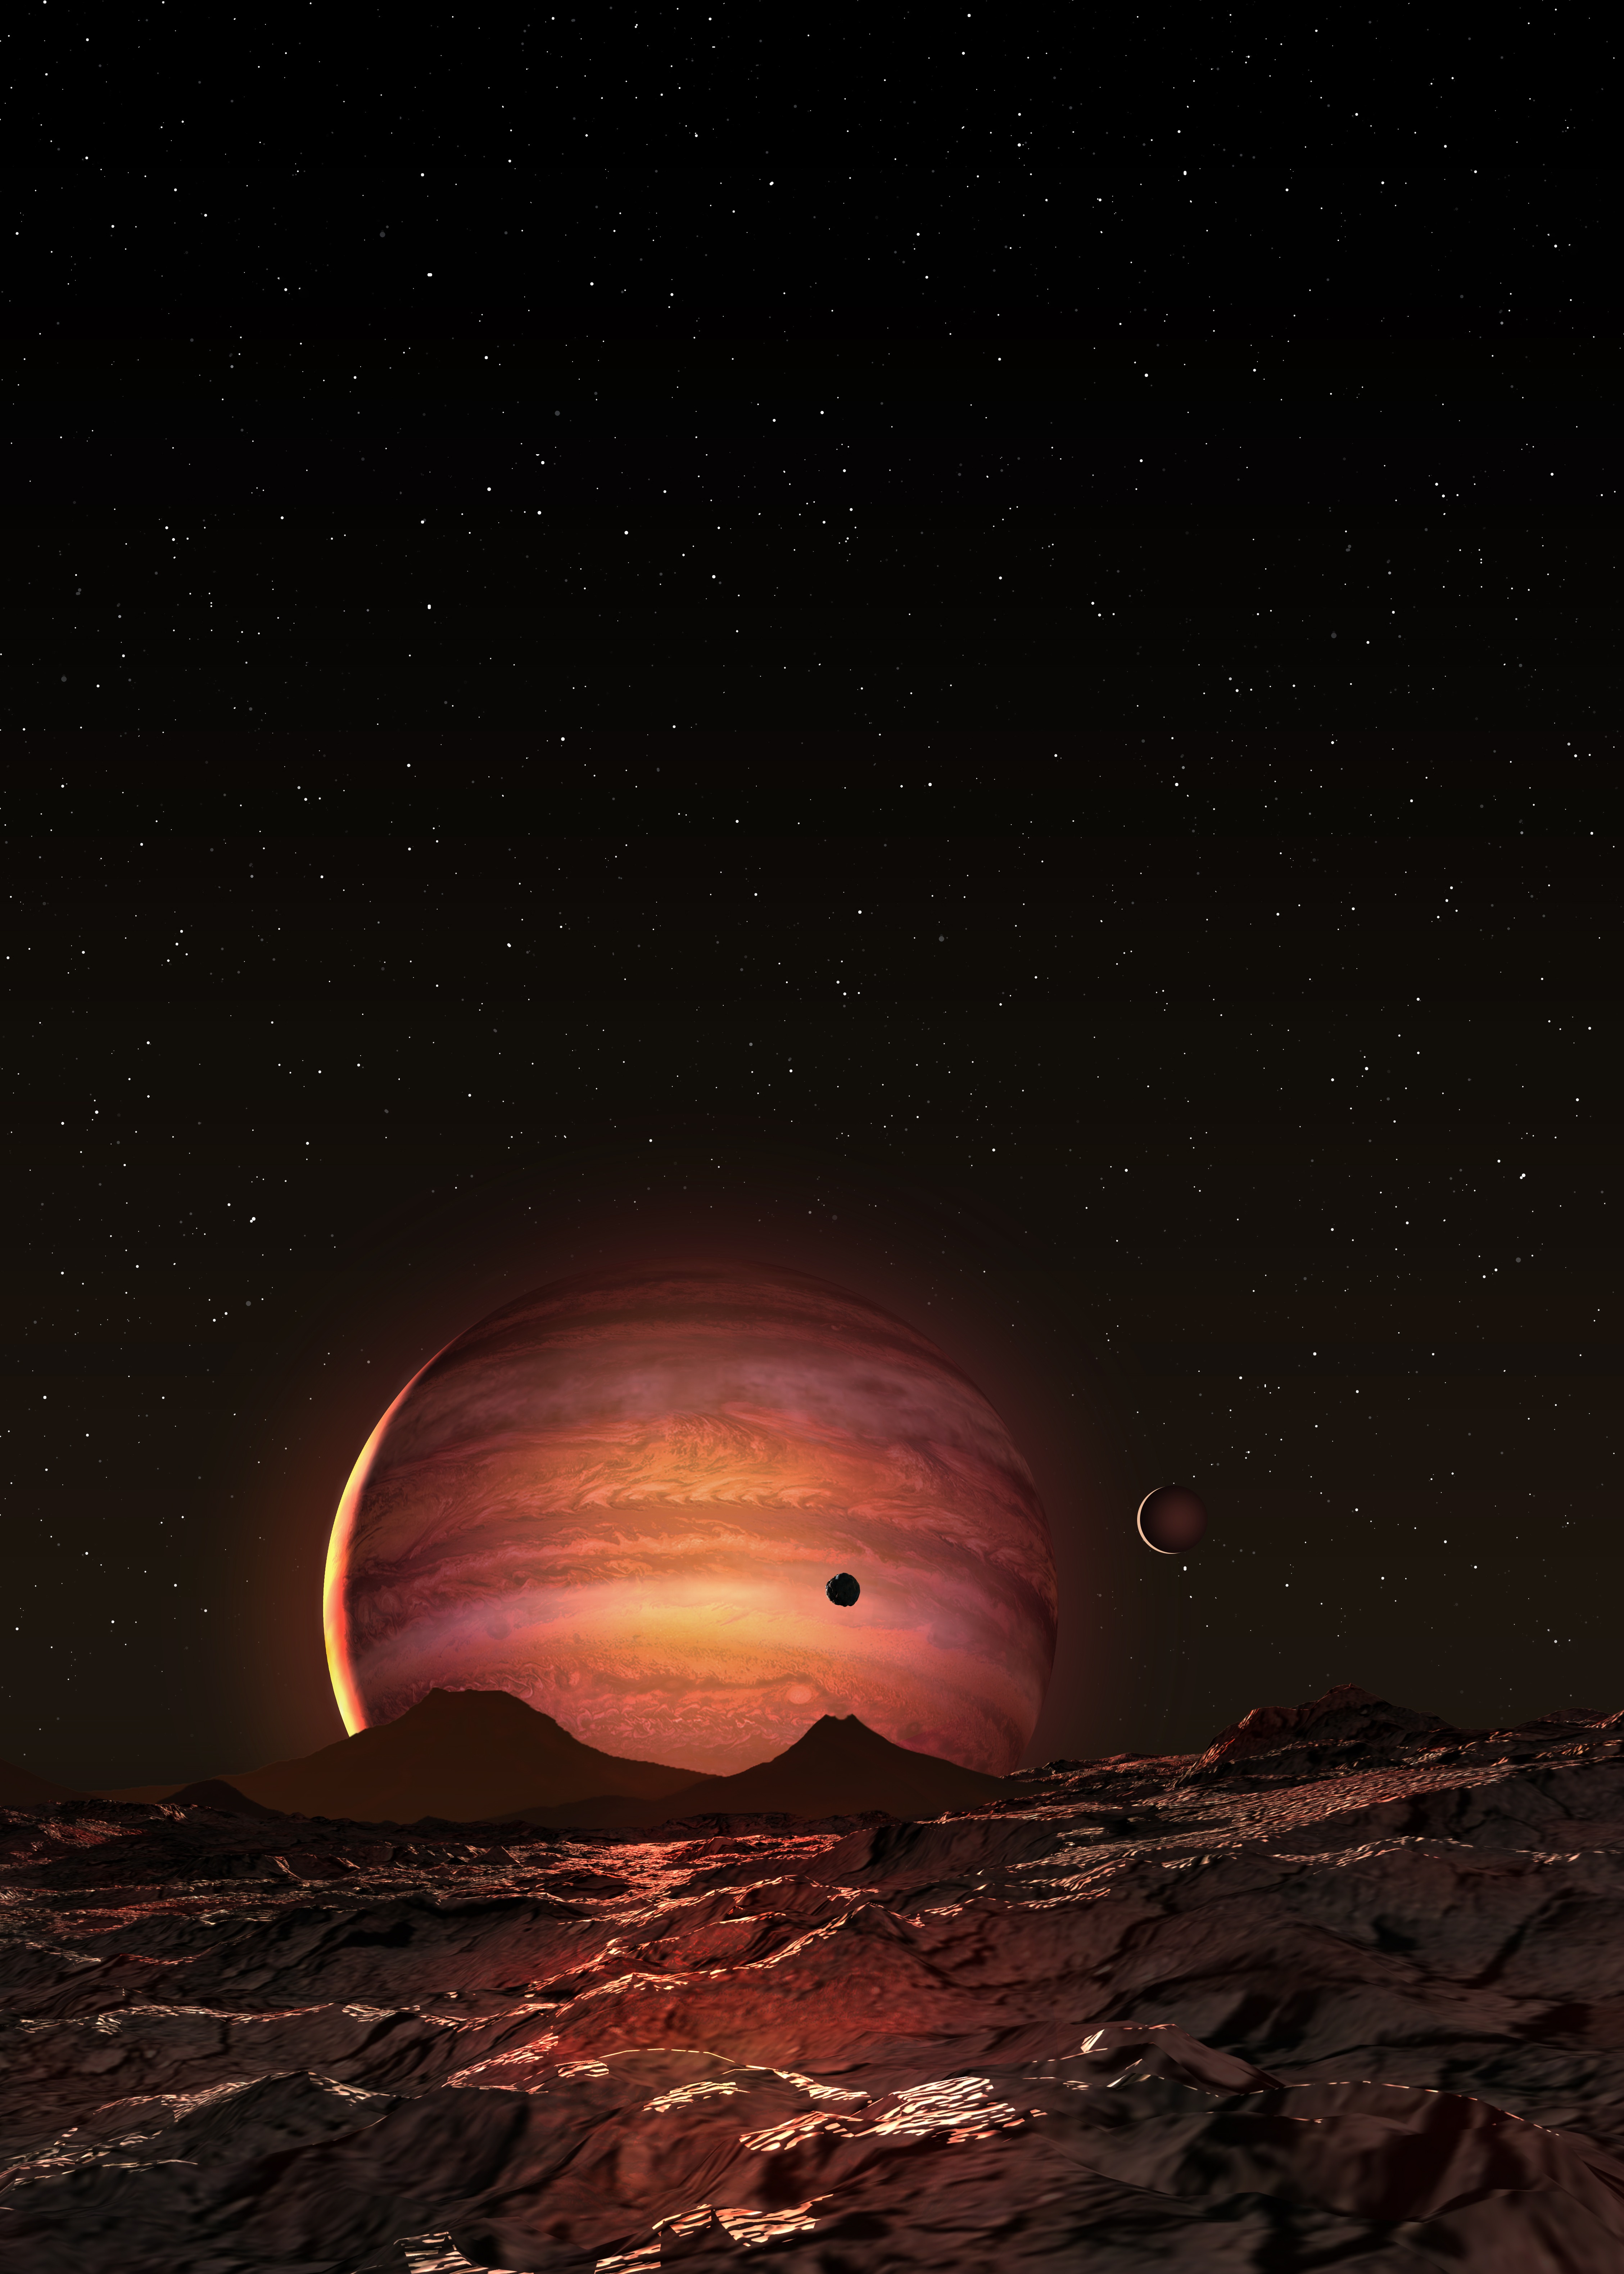 exoplanets discovered